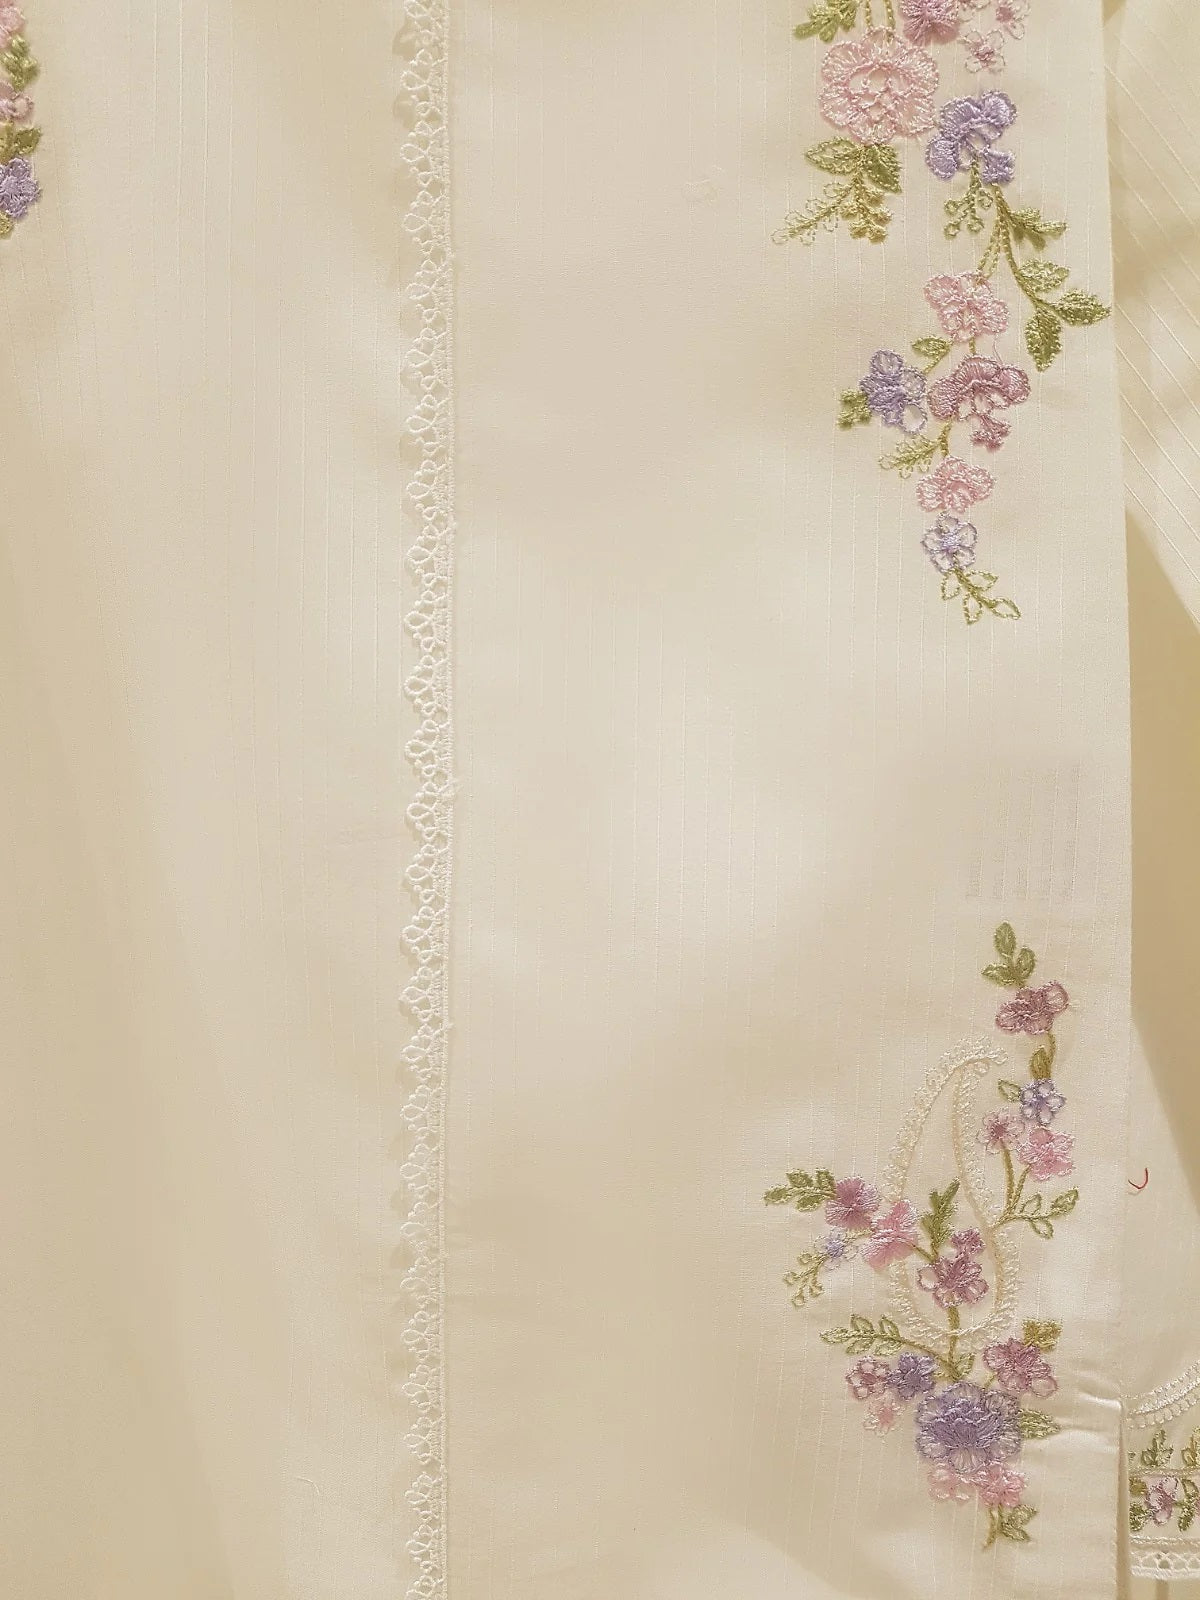 Agha Noor Pure Jacquard Lawn Embroidered Stitched Shirt HD-147601